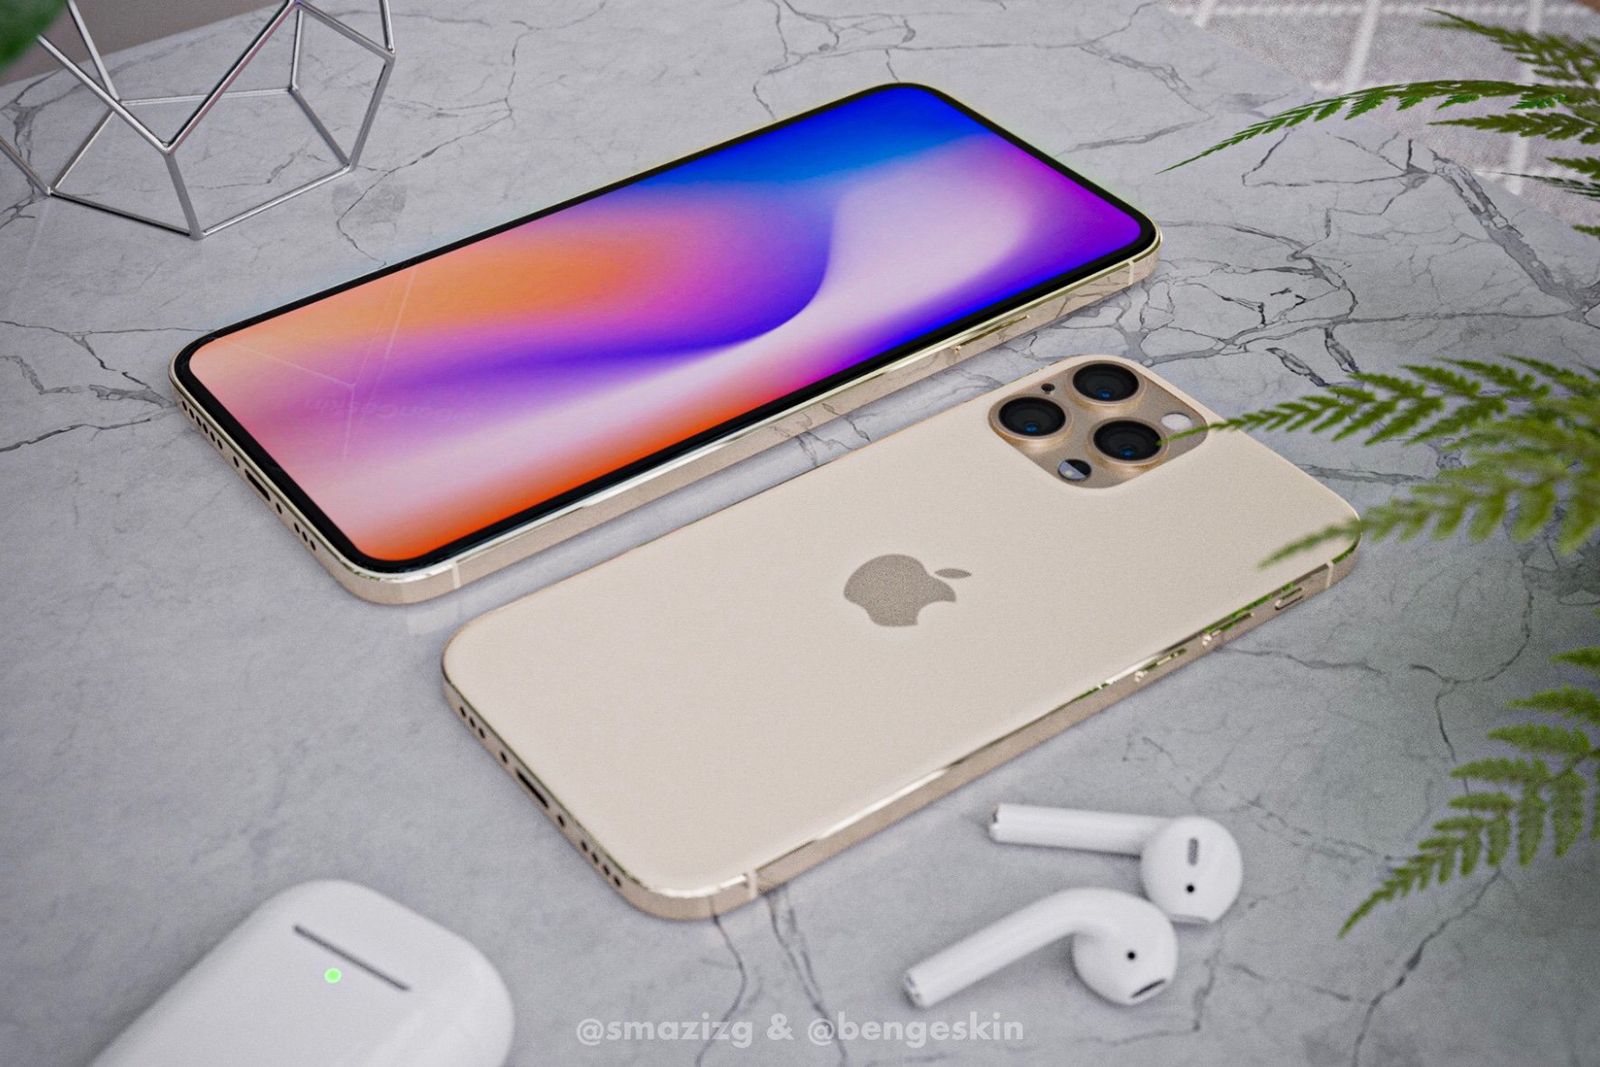 Apple products launching in 2020 Our predictions for iPhone iPad Mac AirPods and more image 1